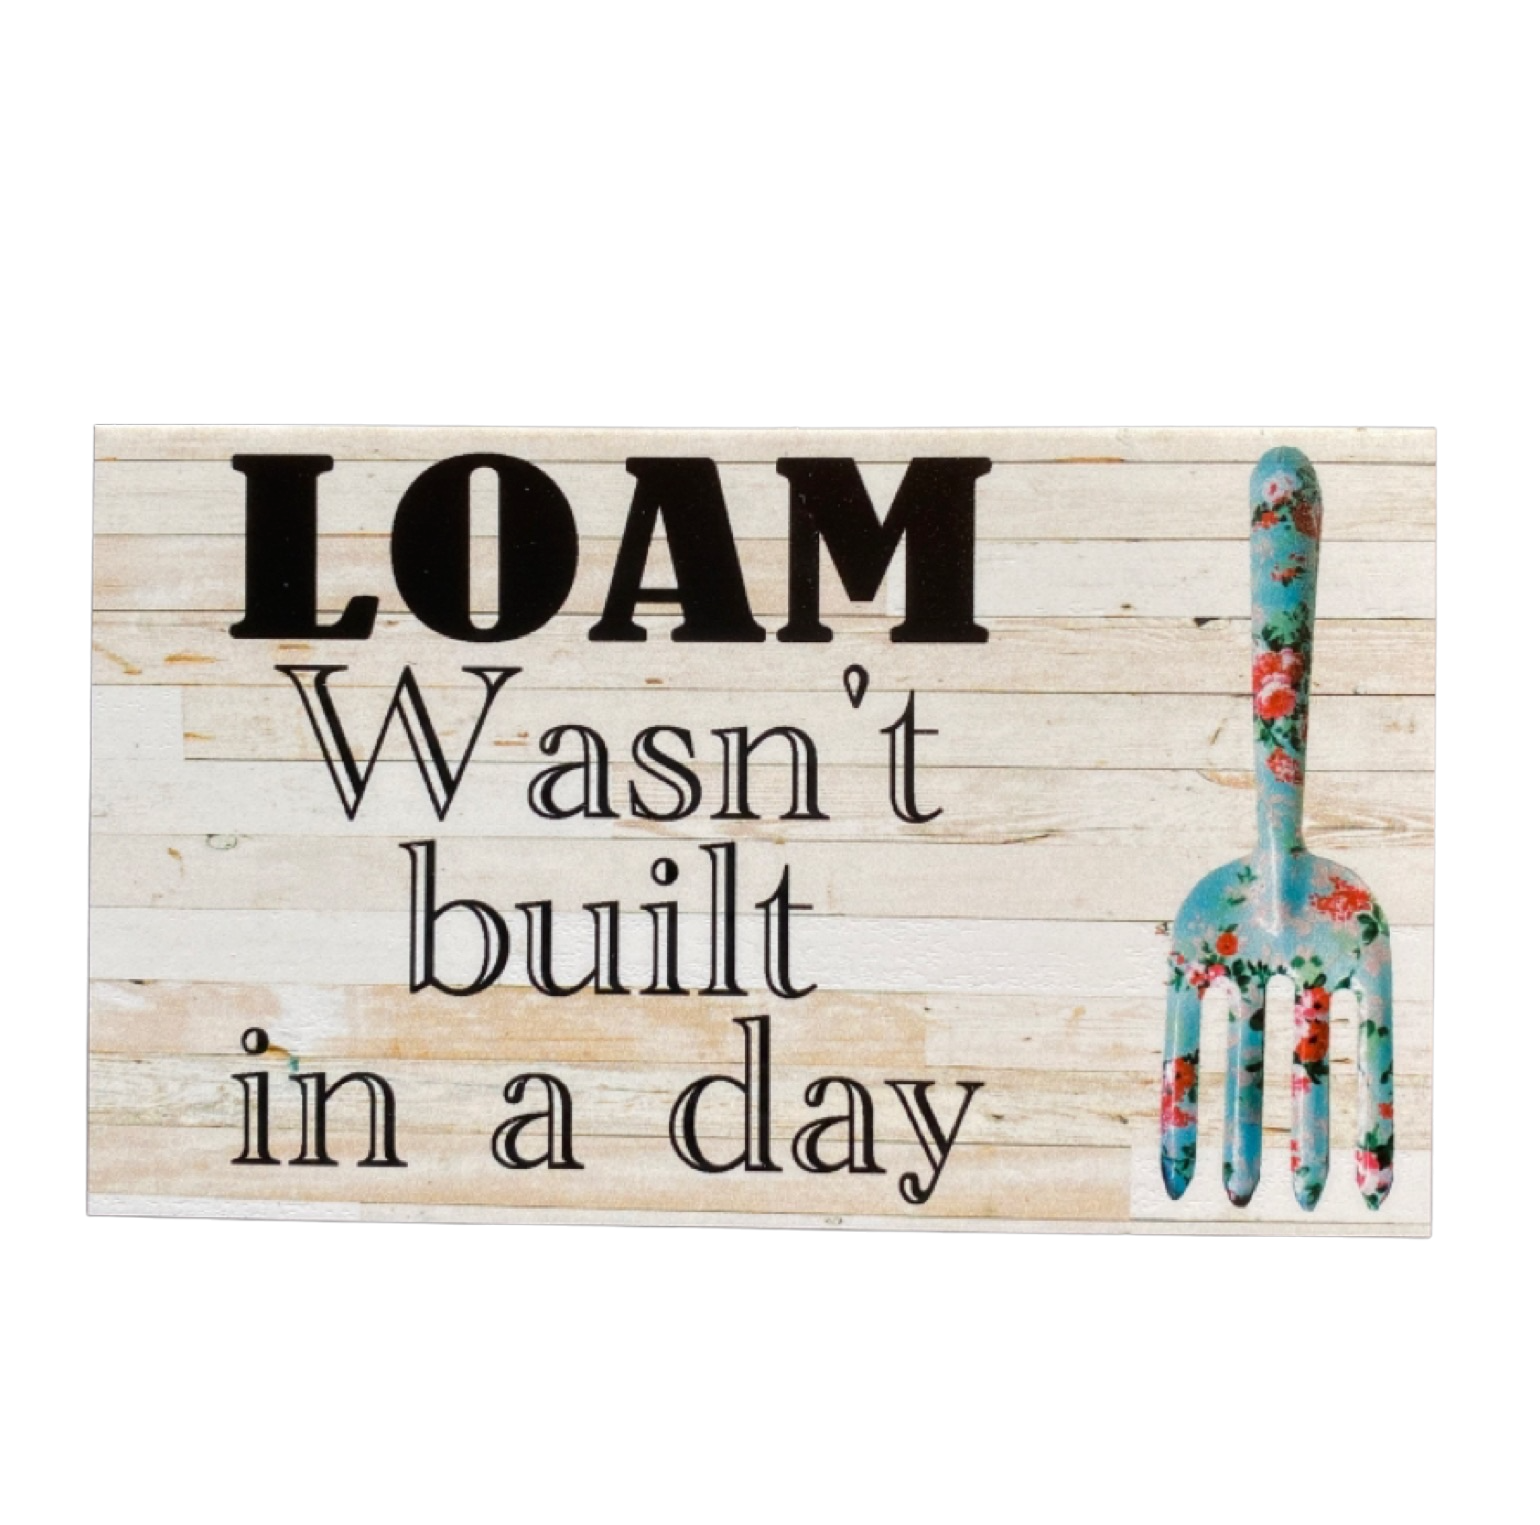 Loam Wasn't Built Day Soil Garden Sign - The Renmy Store Homewares & Gifts 